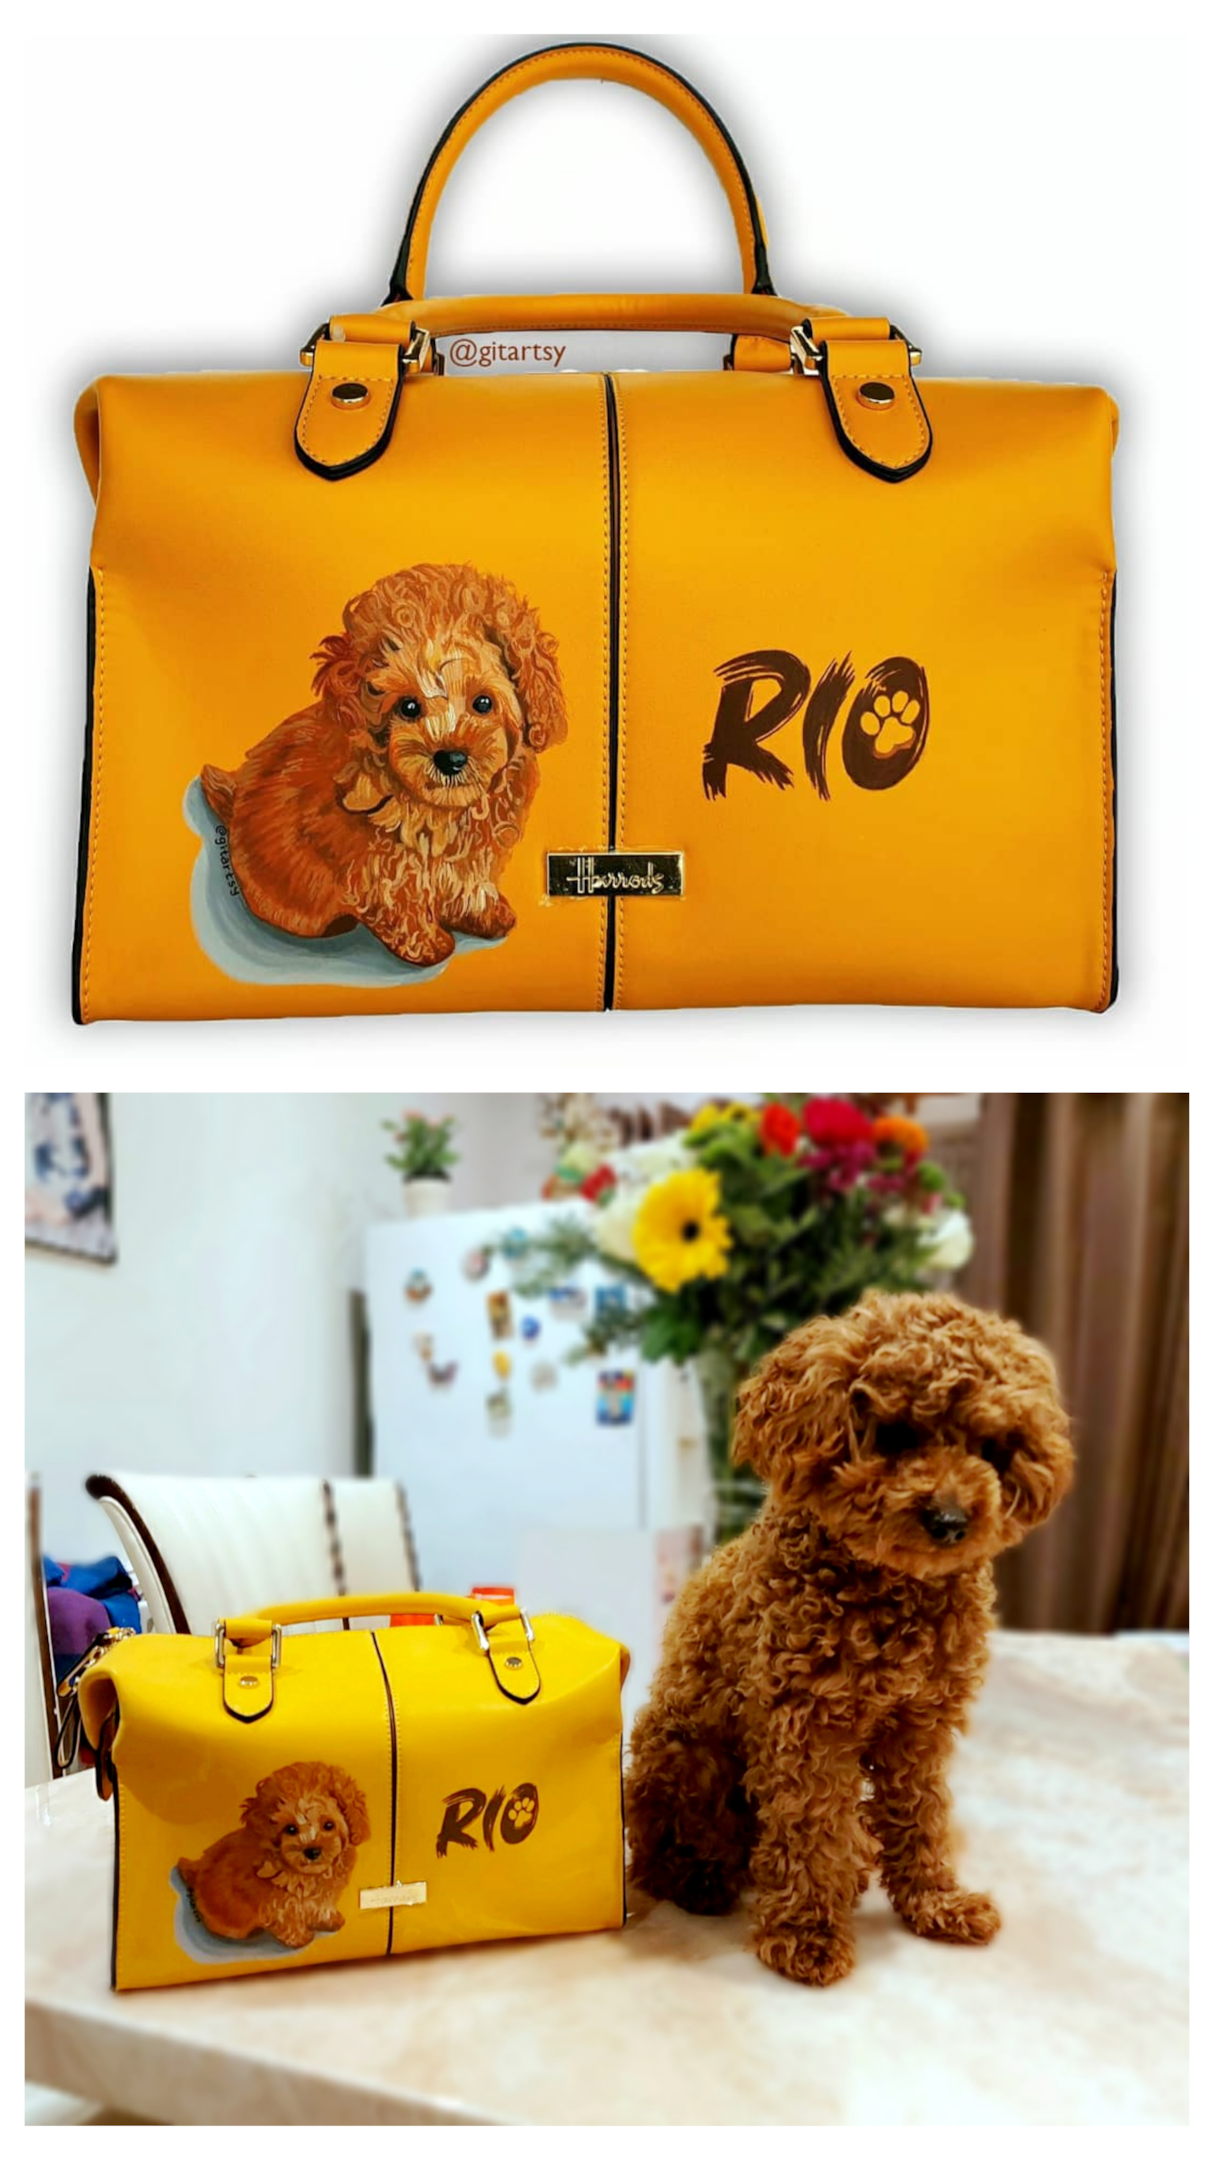 Pet puppy toy poodle sitting on a table - with customised hand painted yellow bag 